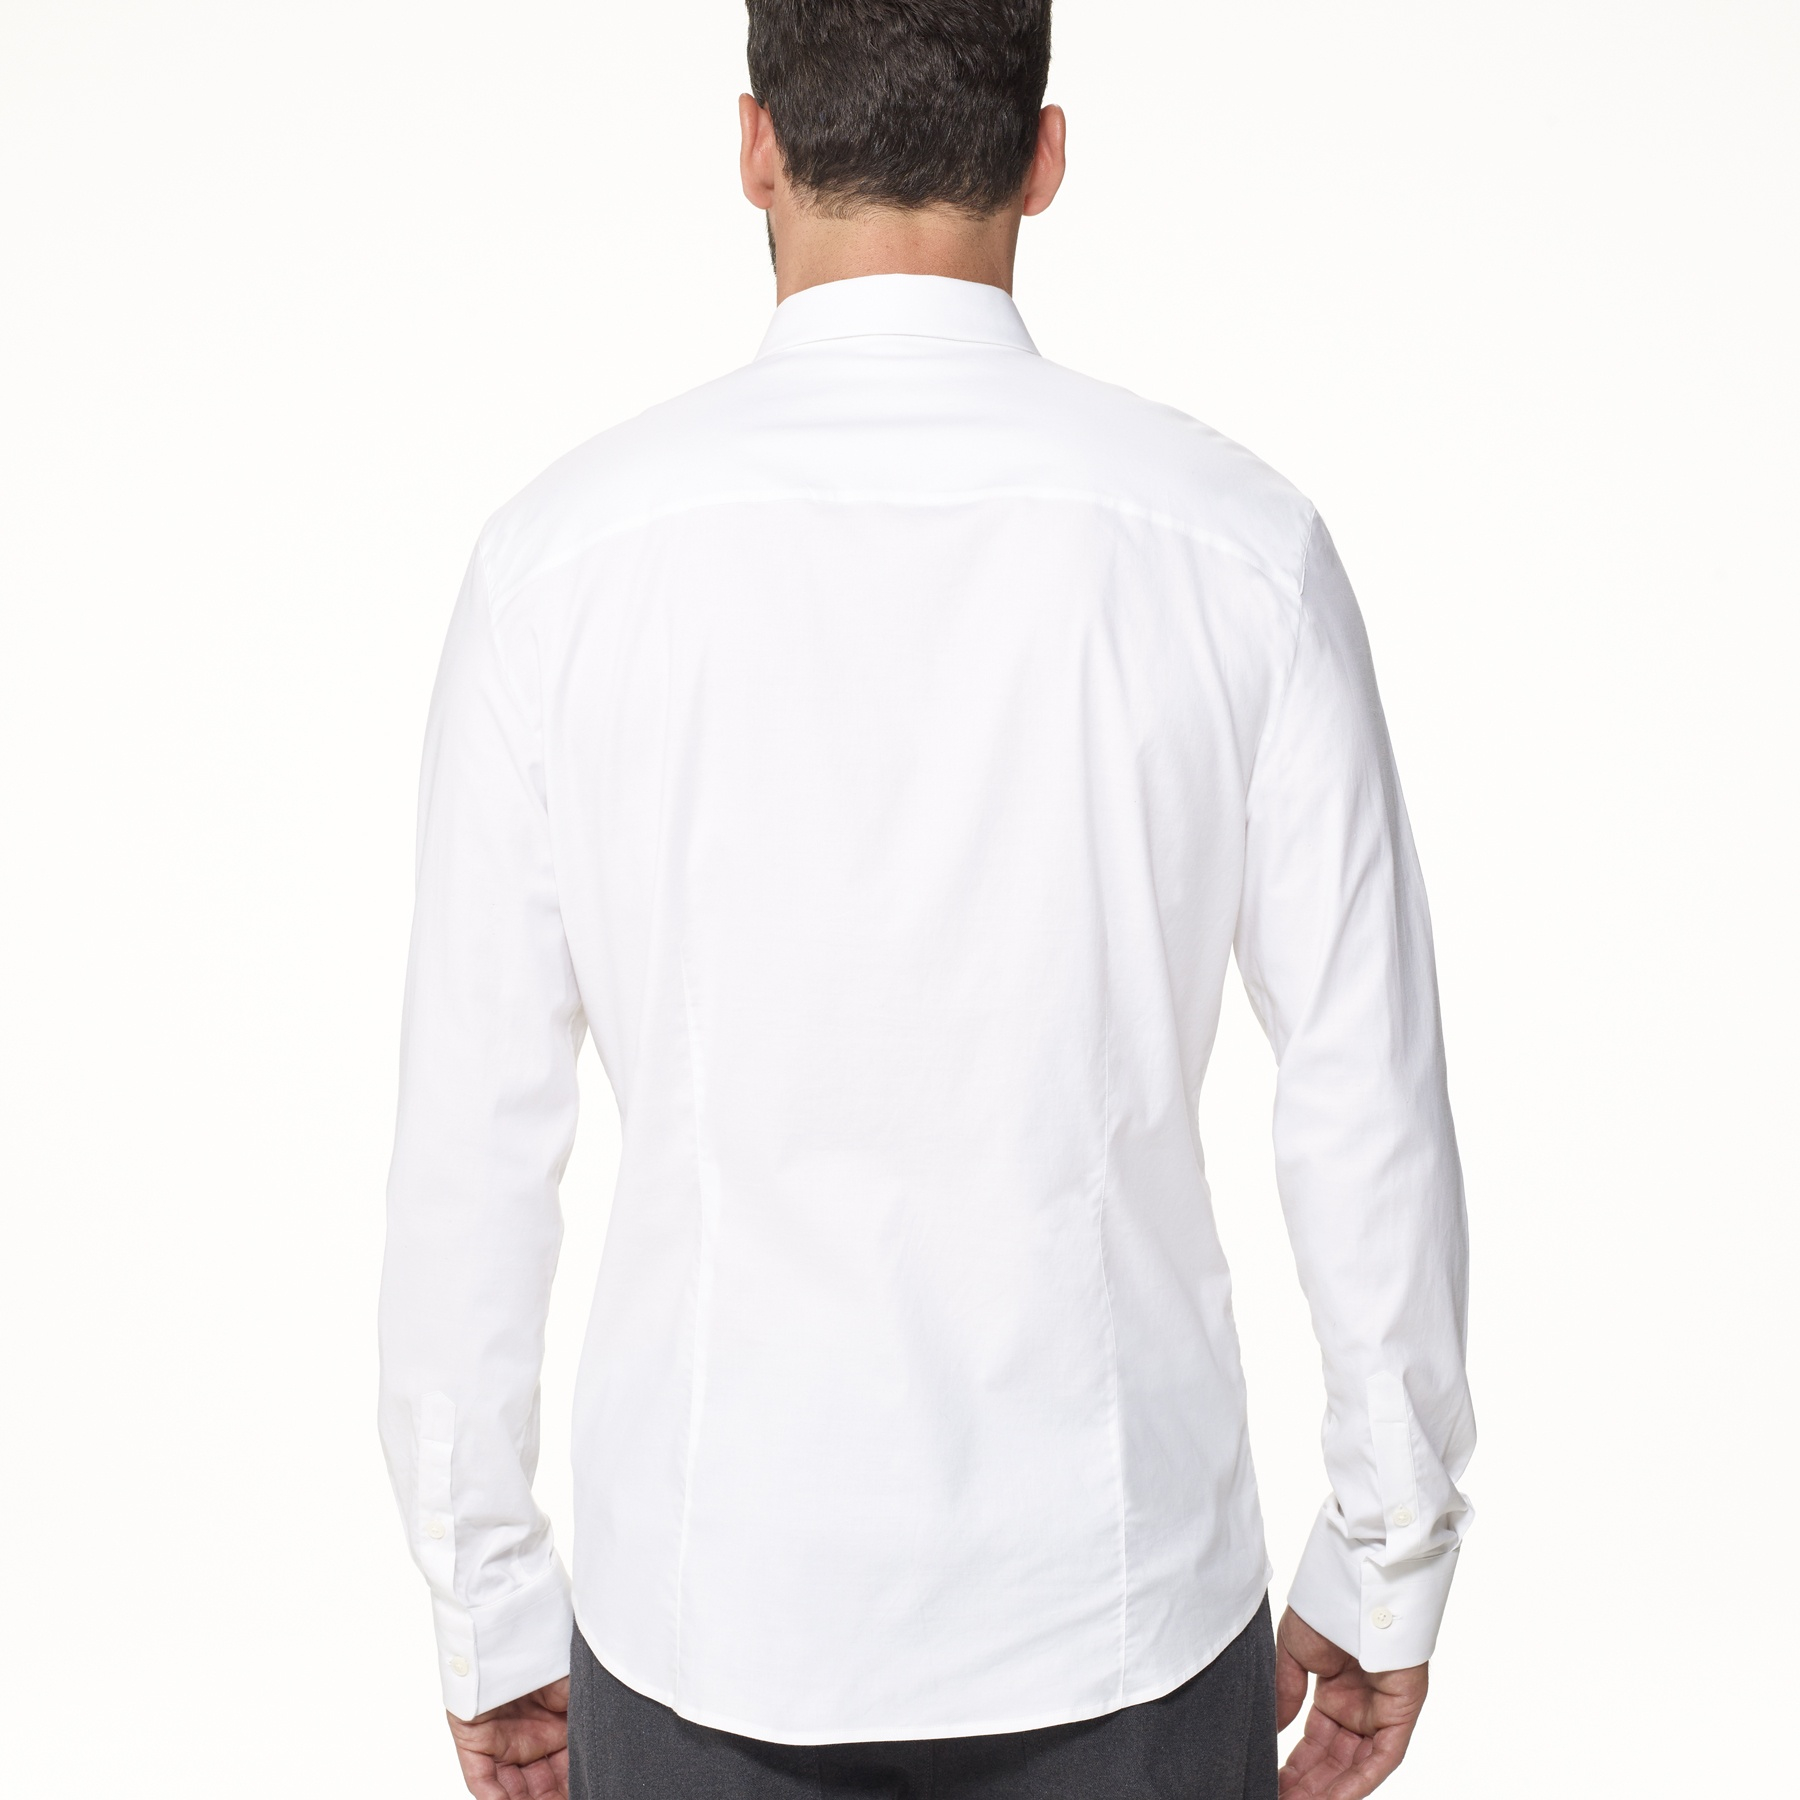 James Perse Stretch Flannel Shirt in White for Men - Lyst